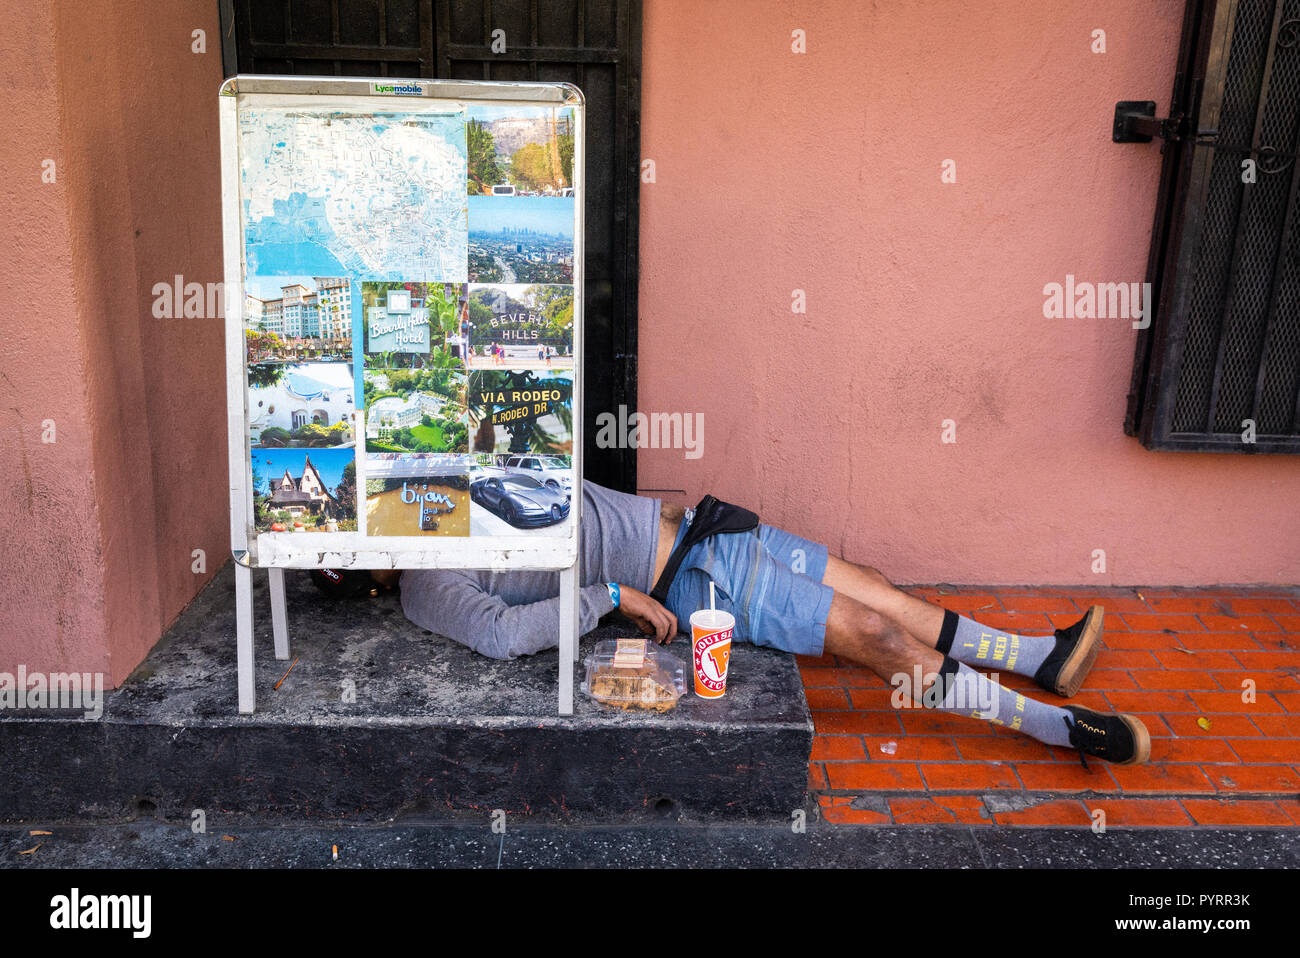 Man laying on his back on Hollywood Boulevard, Los Angeles, California. Stock Photo